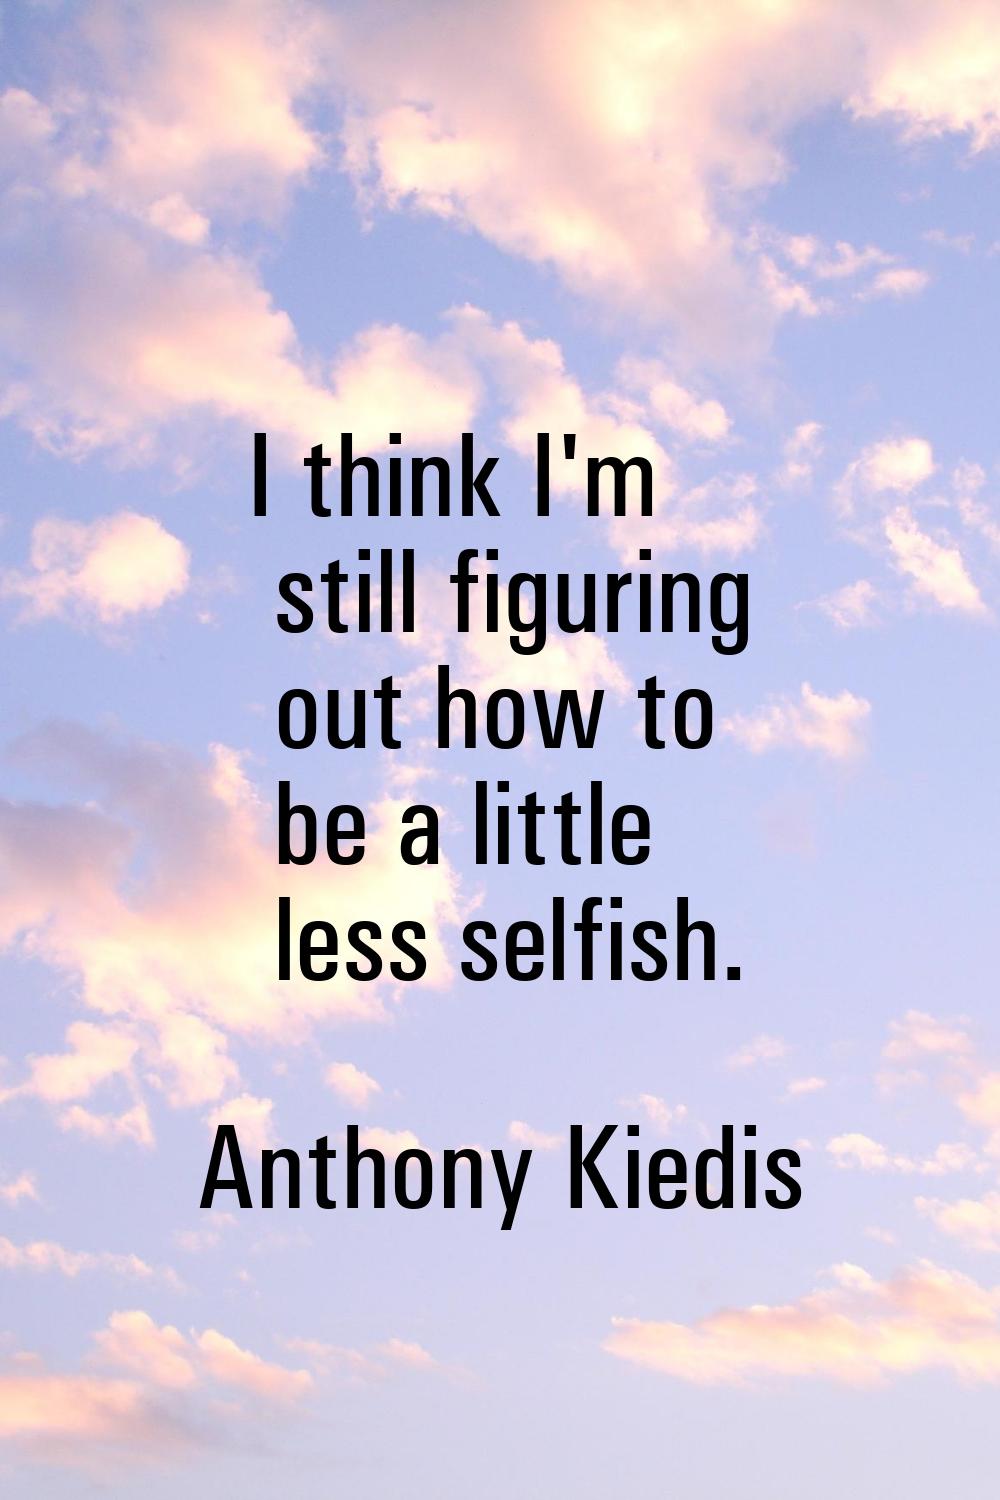 I think I'm still figuring out how to be a little less selfish.